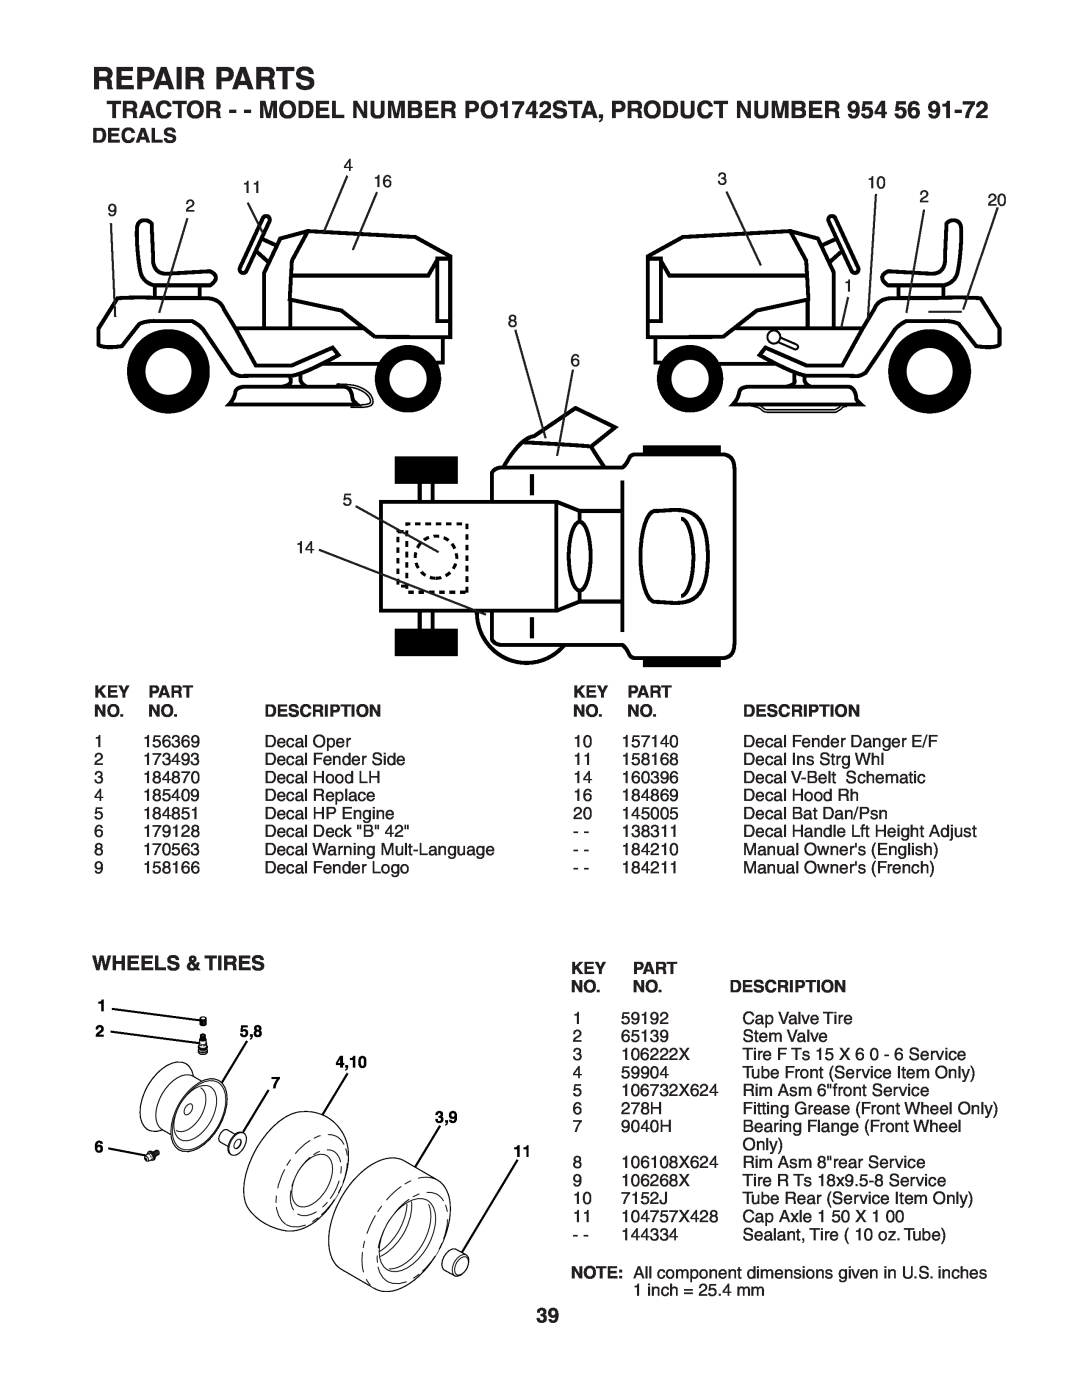 Poulan manual Decals, Wheels & Tires, Repair Parts, TRACTOR - - MODEL NUMBER PO1742STA, PRODUCT NUMBER 